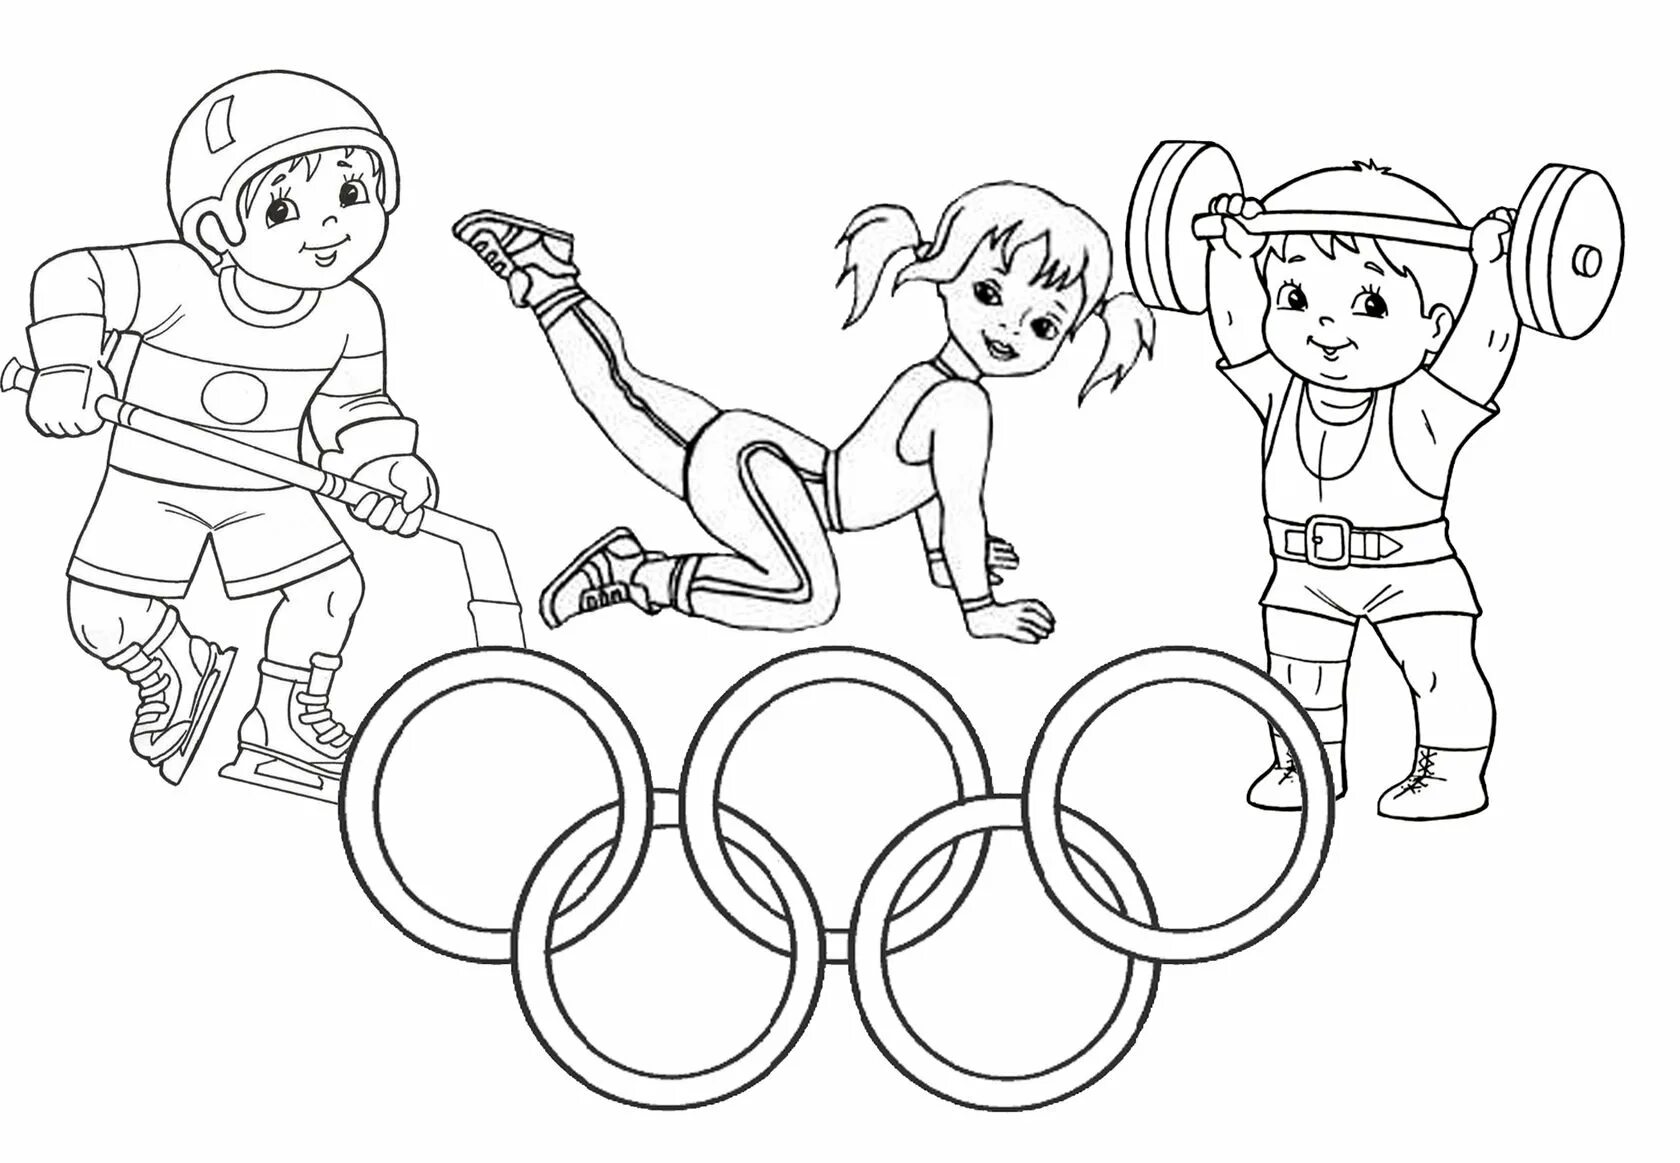 Comic coloring book for children's olympic sports